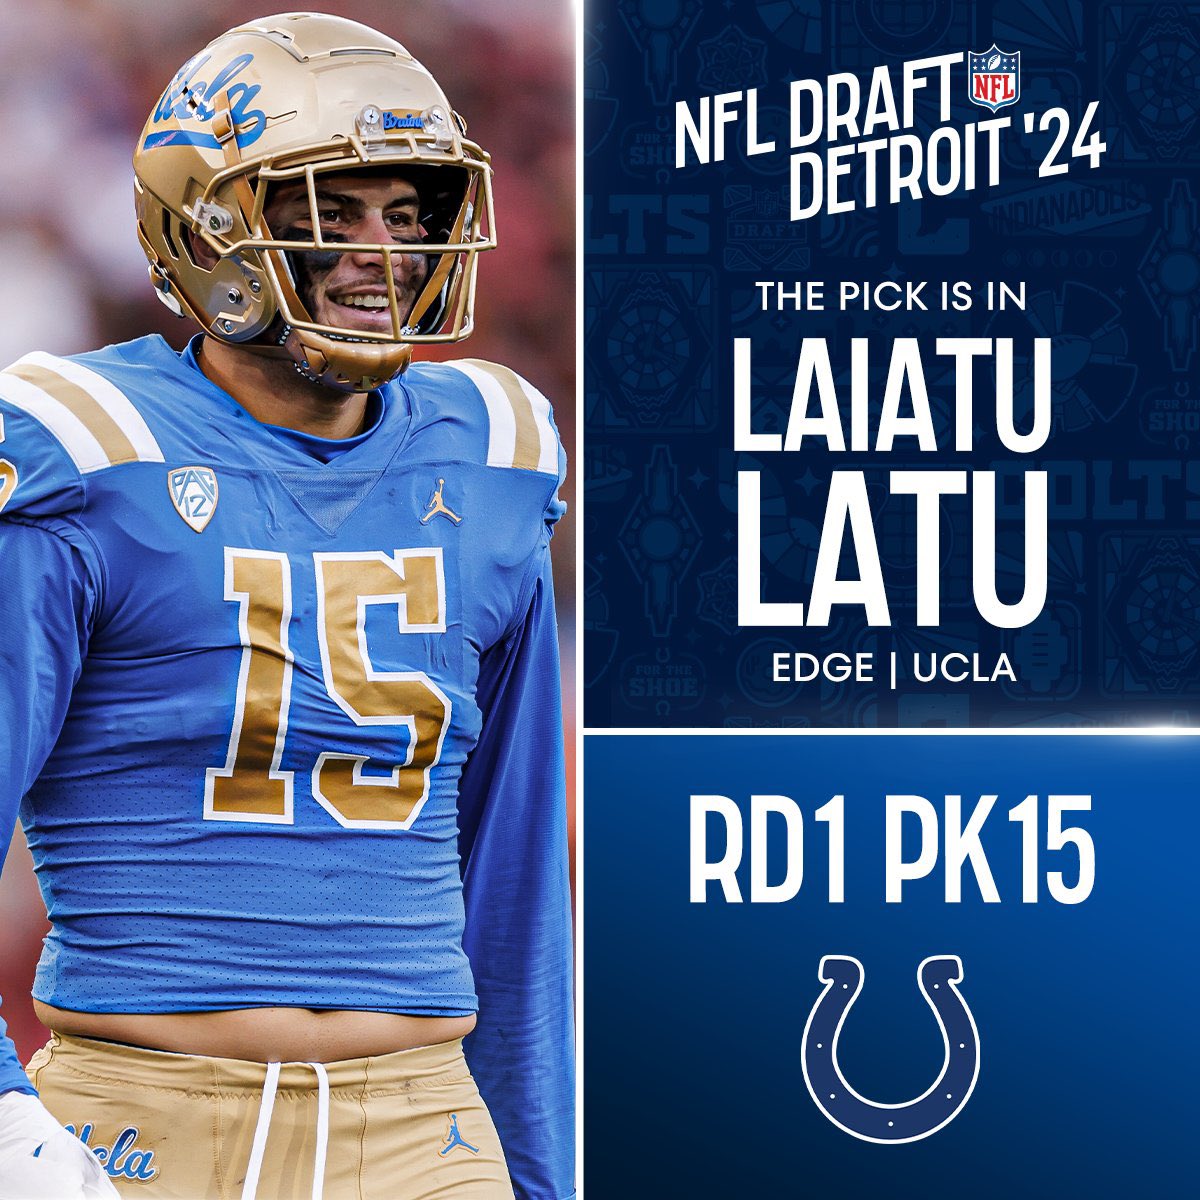 @Colts fans 
How ya feelin ? 

Welcome to Indianapolis 
#LaiatuLatu

#IndianapolisColts #NFLDraft 
#UclaBruins